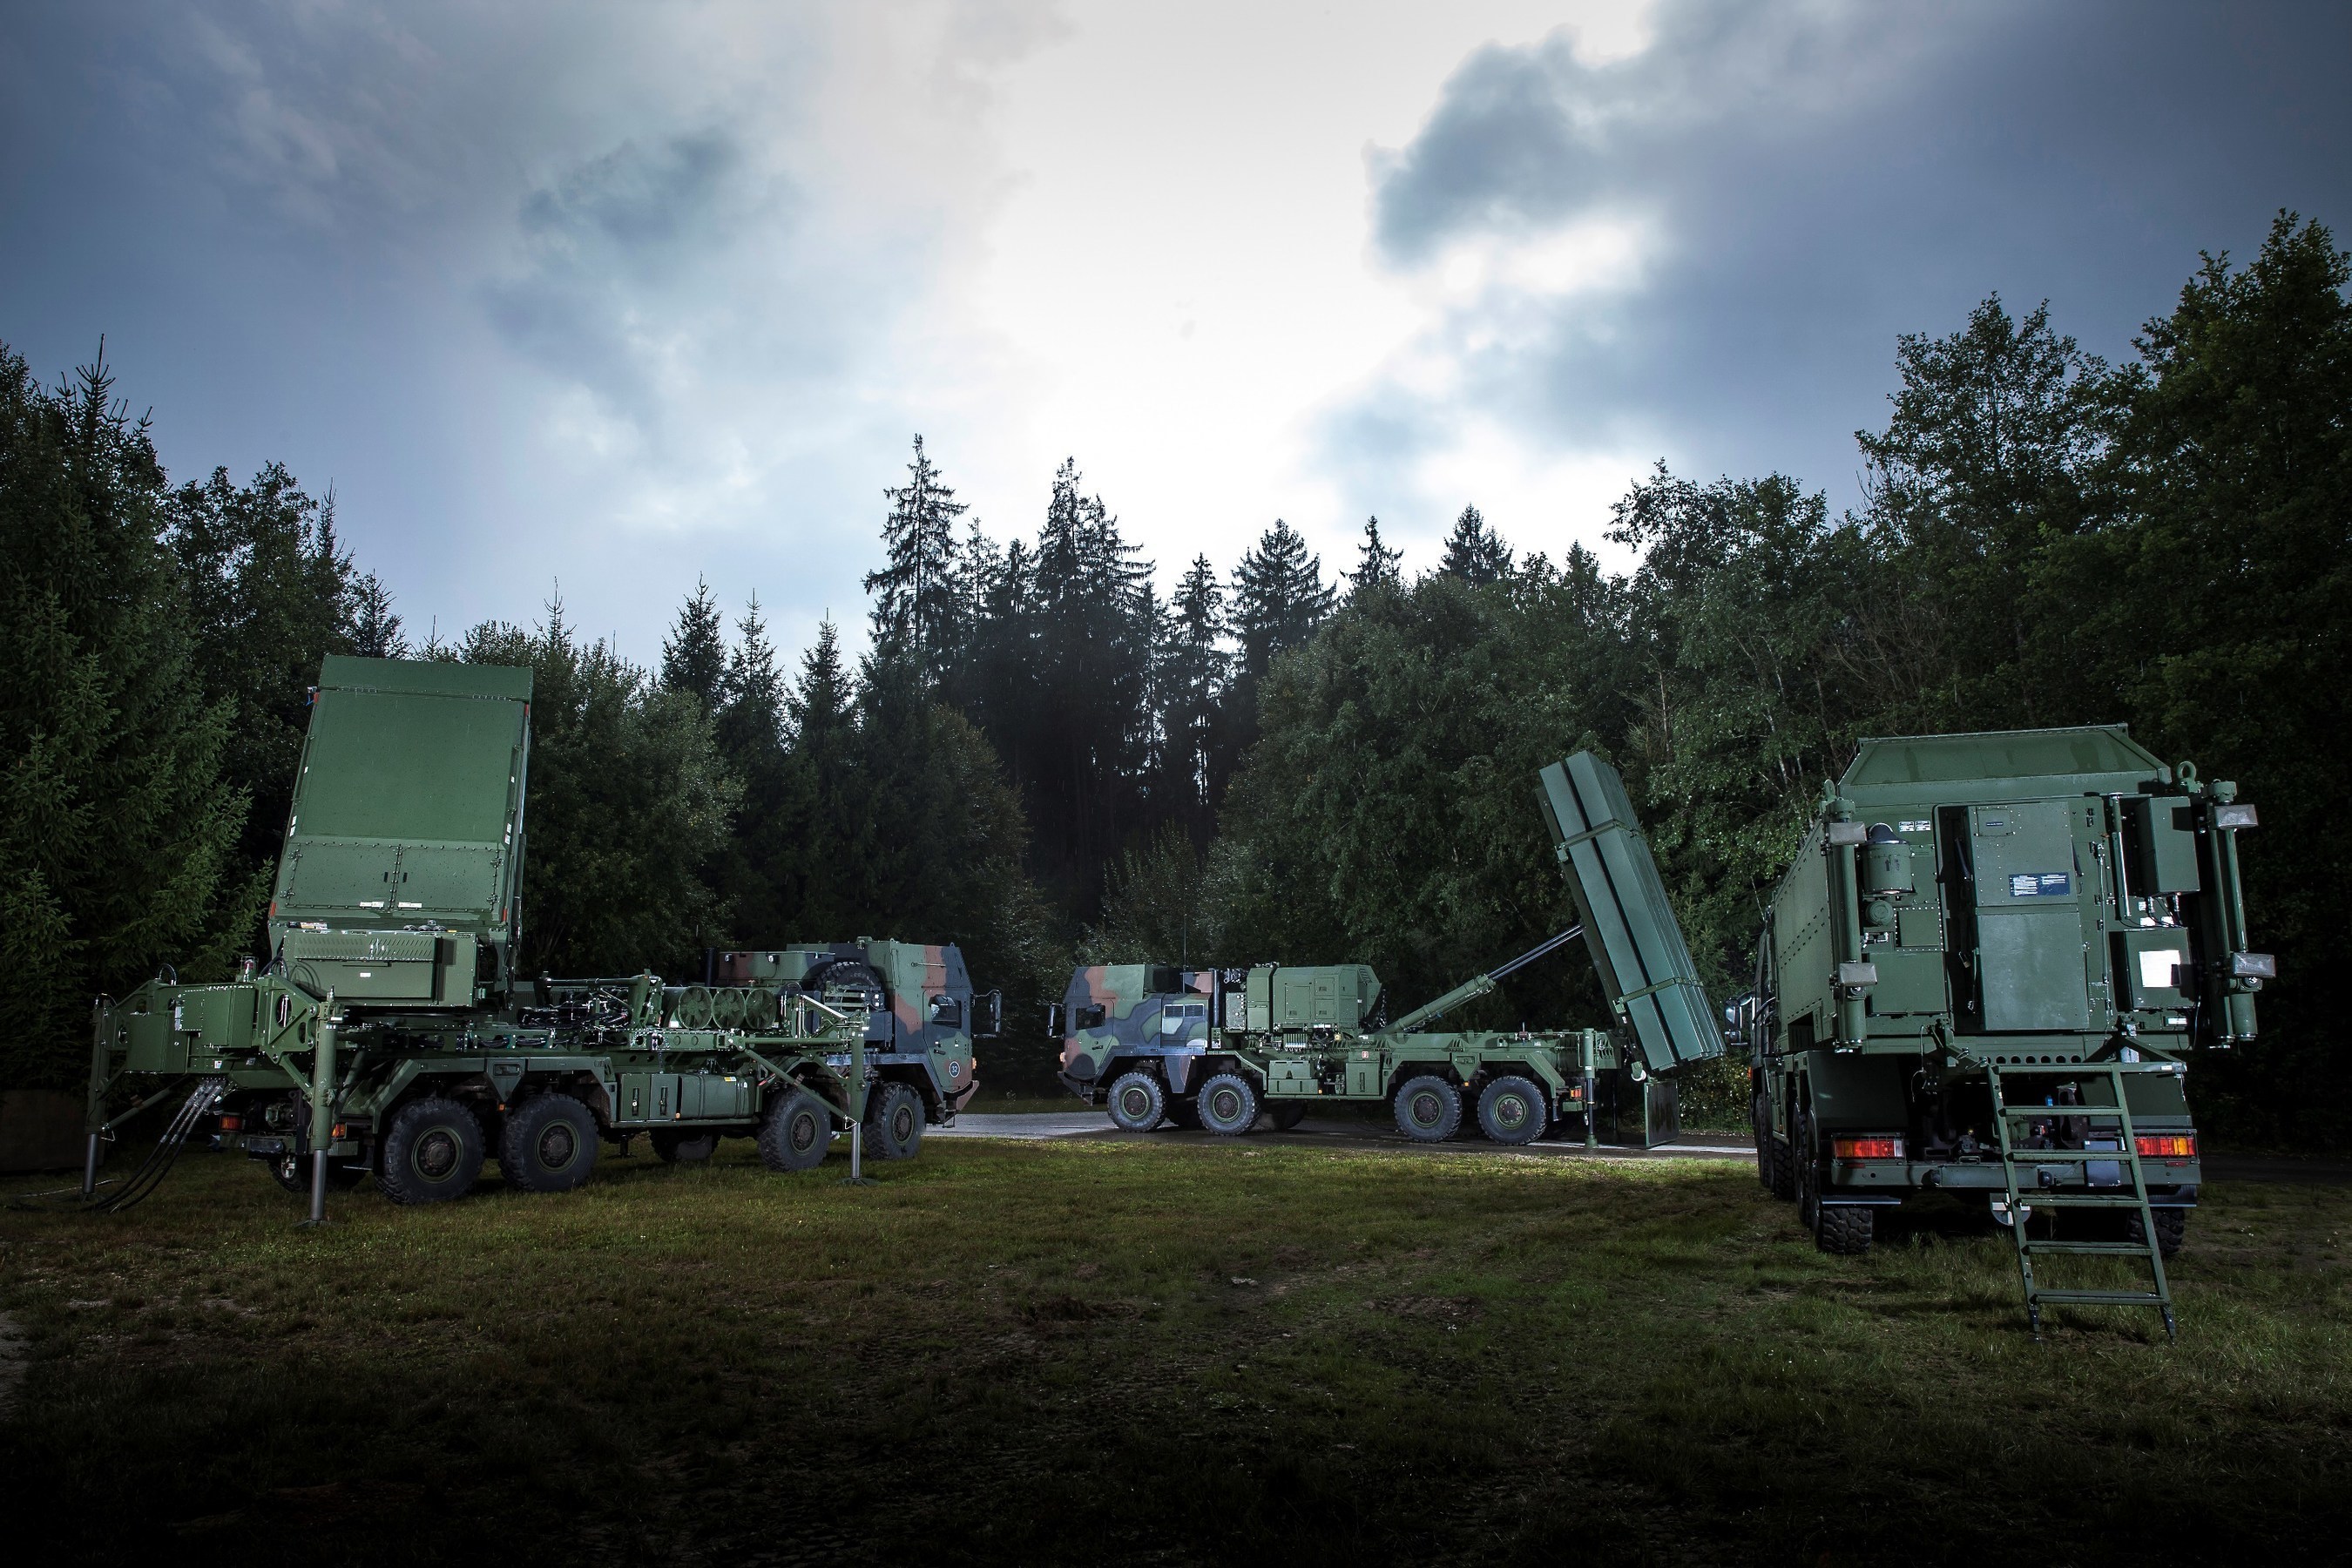 Germany Announces MEADS Selection for Future Air and Missile Defense System